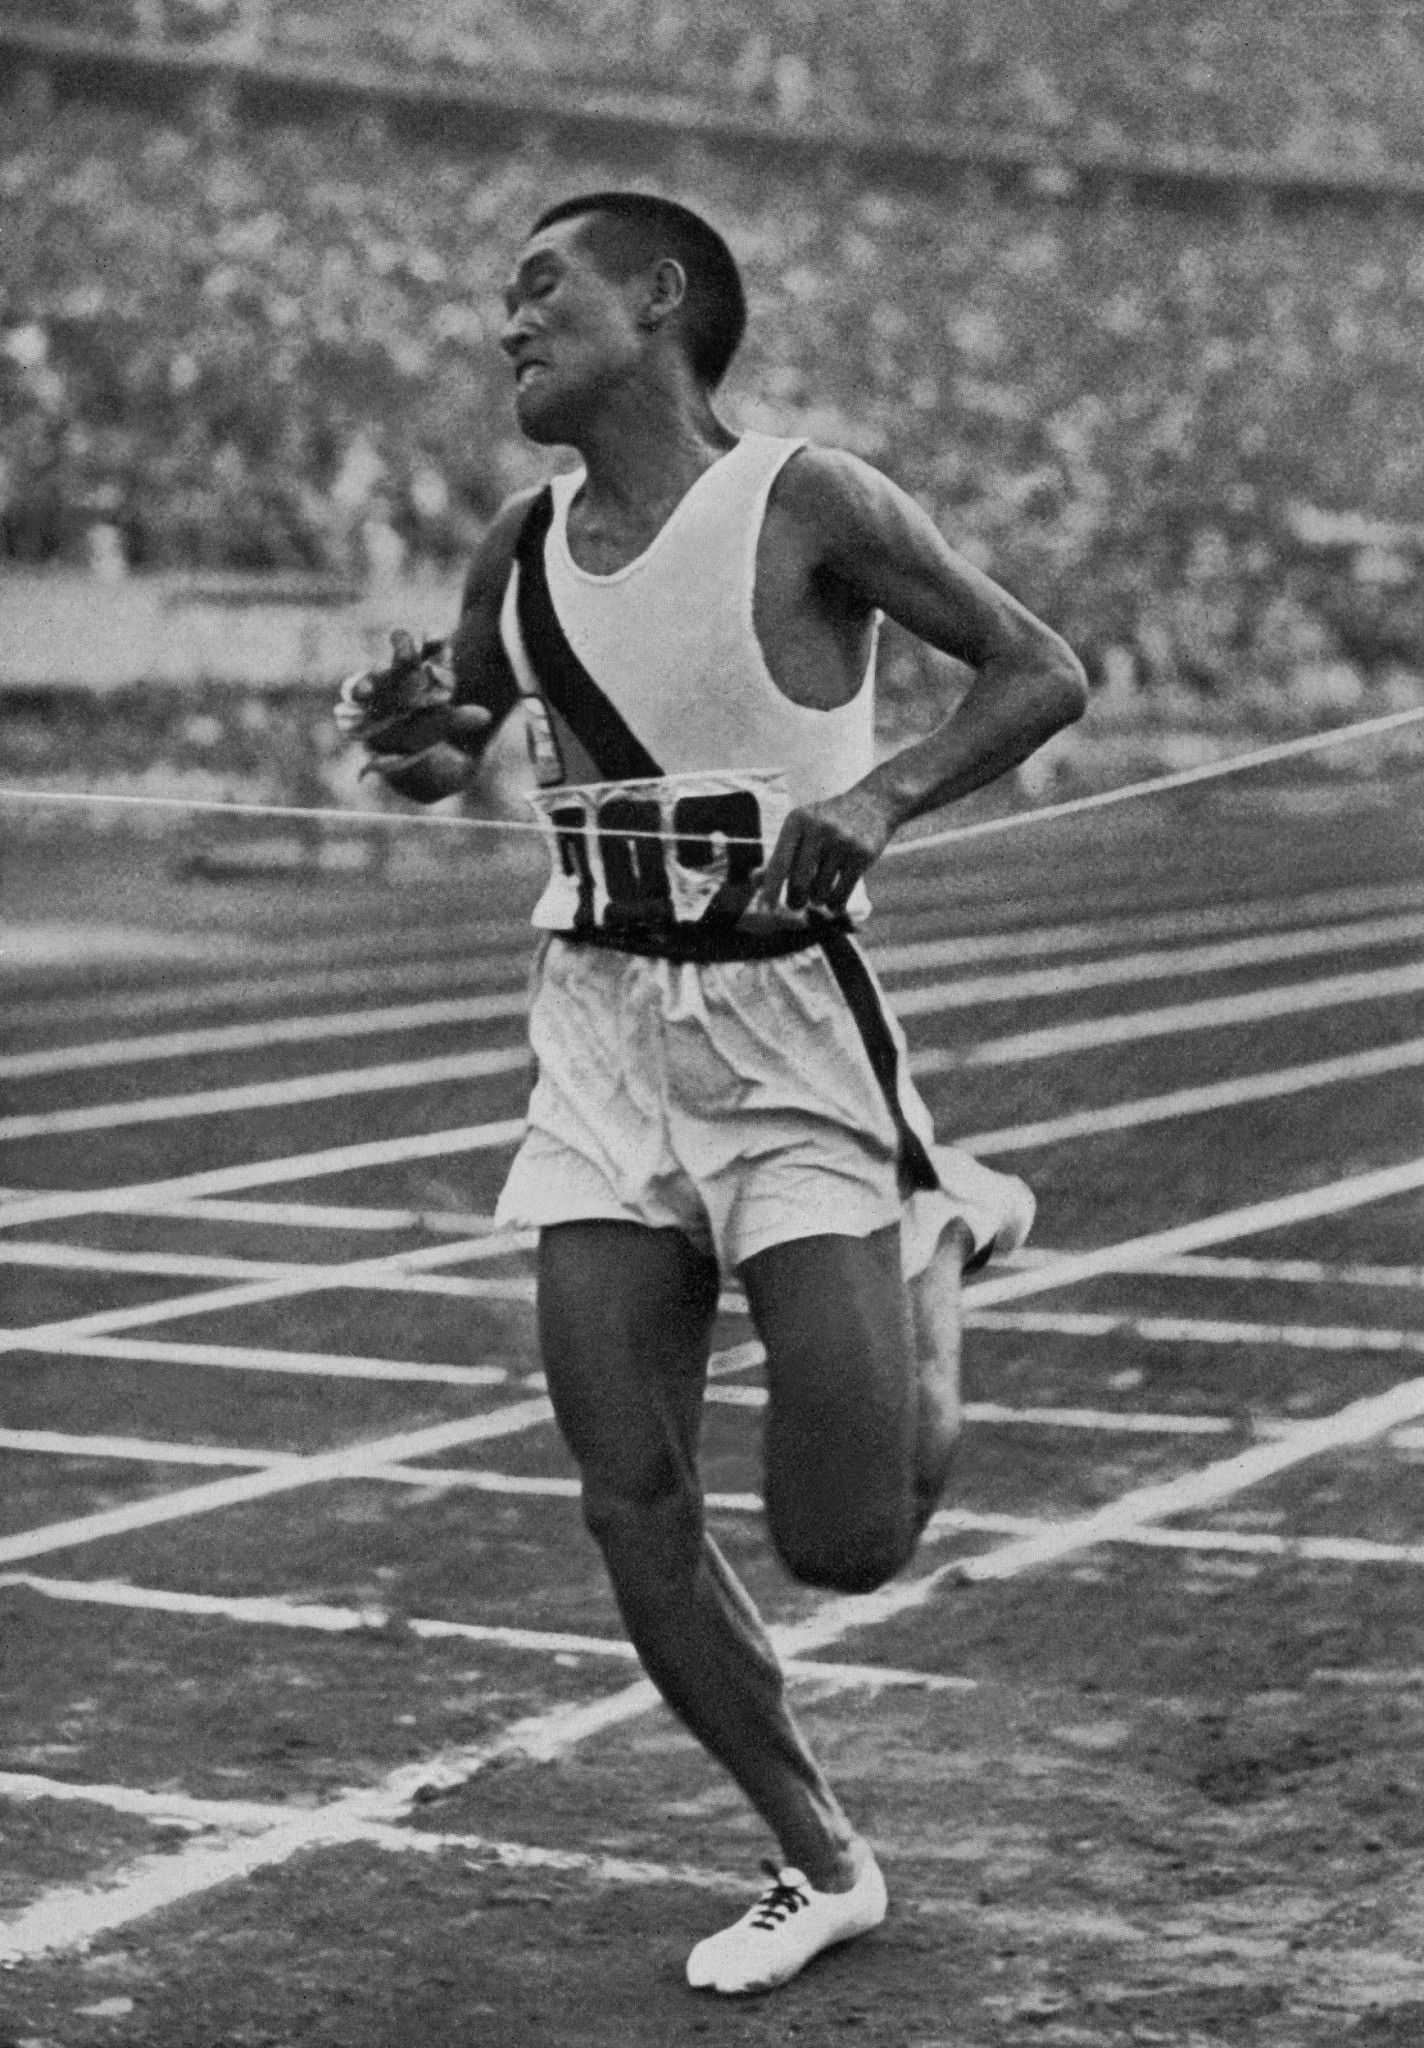 Korean champion Kitei Son, running in the colours of the Japanese Empire, crosses victoriously the finish line of the Berlin Olympic marathon in August 1936 ©Getty Images